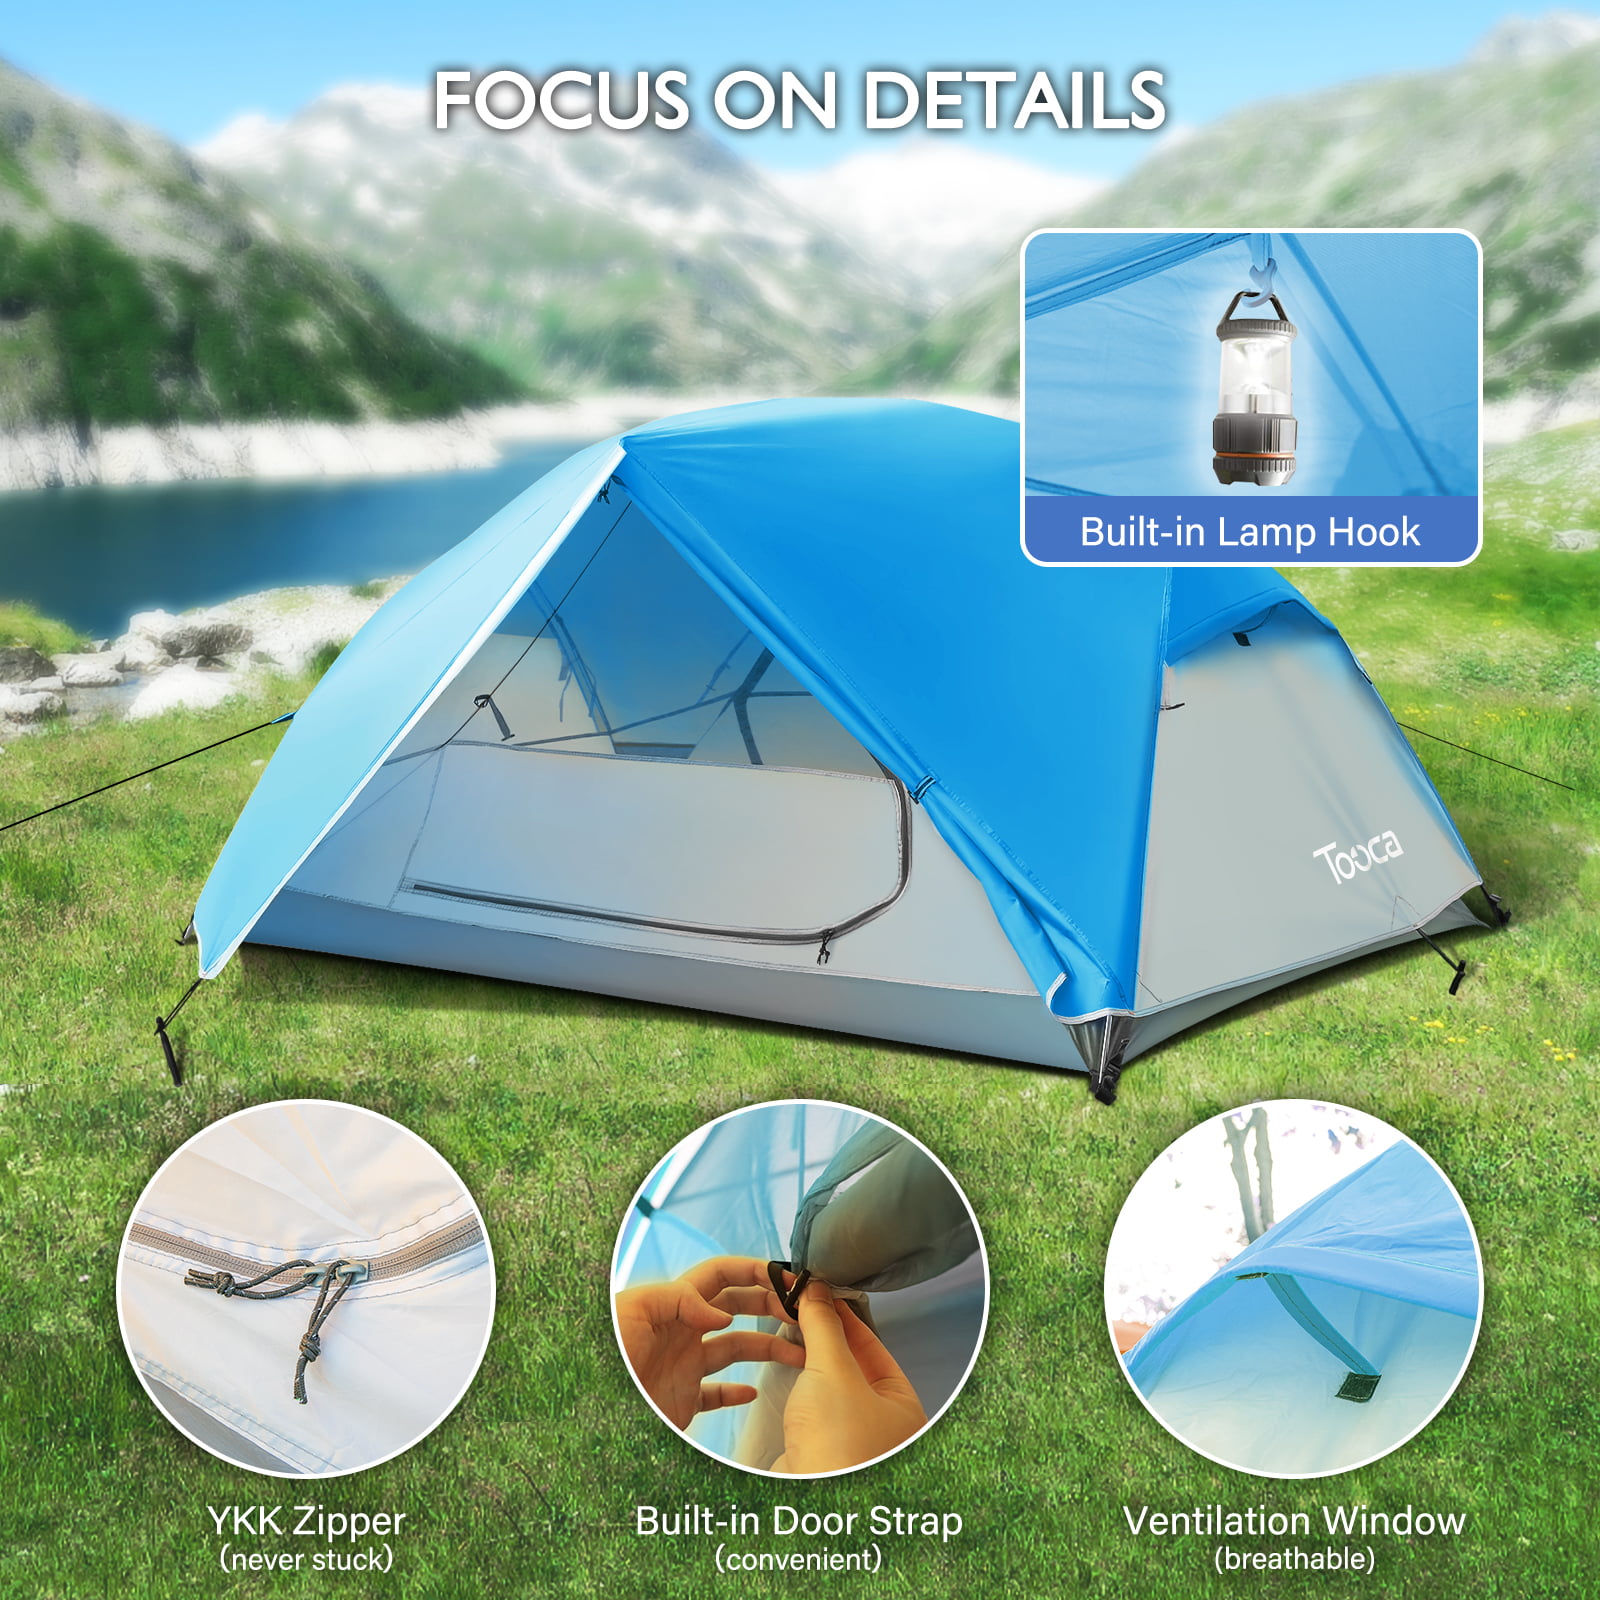 Portable Camping Tent Camouflage Tents 2 Persons Tent Indoor and Outdoor Anti-Mosquito Lightweight Waterproof Tent Toys for Camping Hiking Backpacking Picnic with Storage Bag 